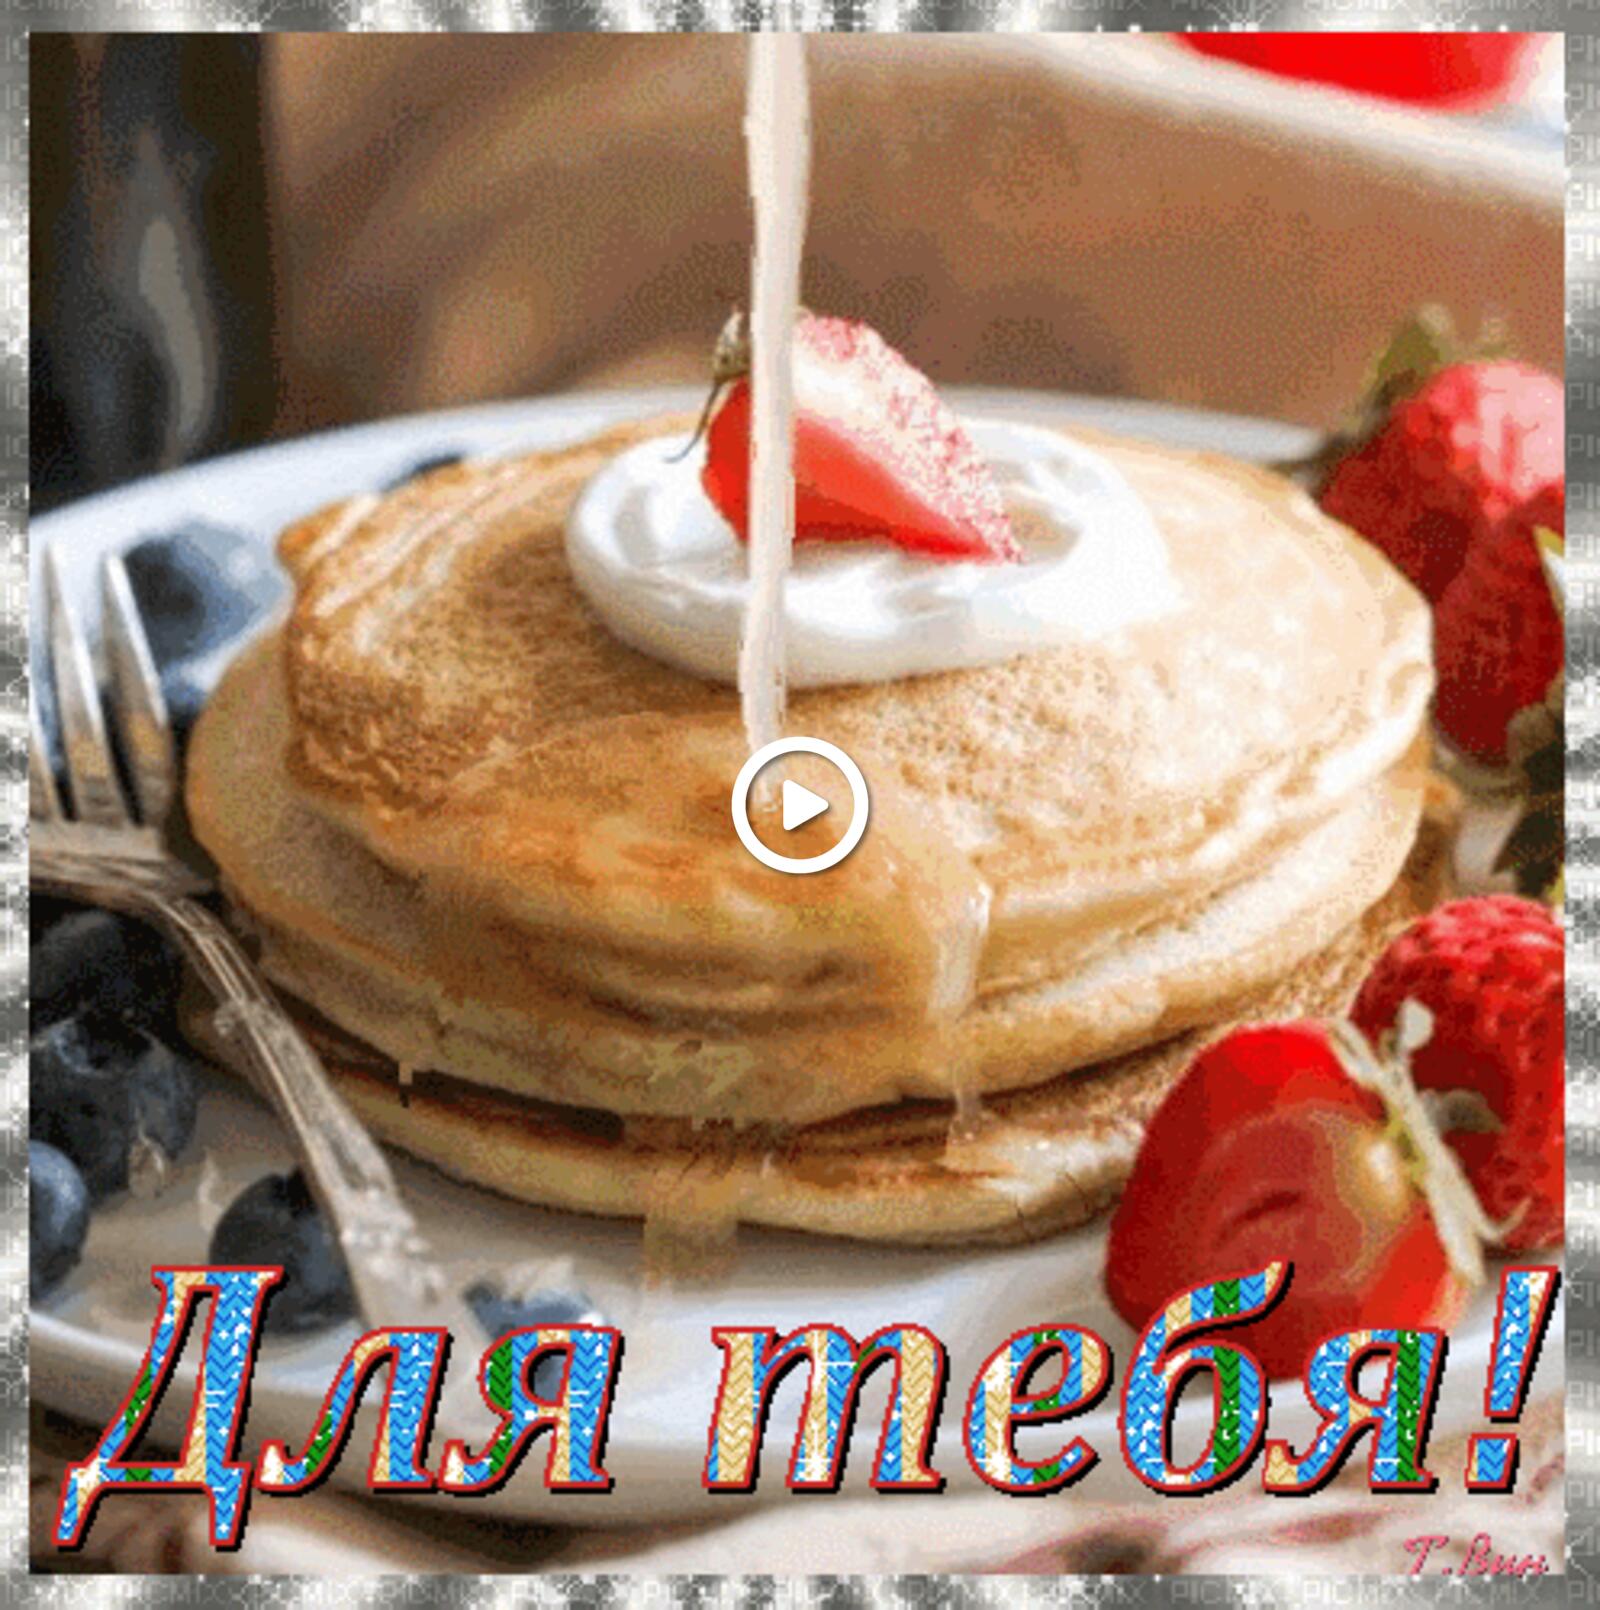 free wishes for every day cards treat yourself in the morning pancakes